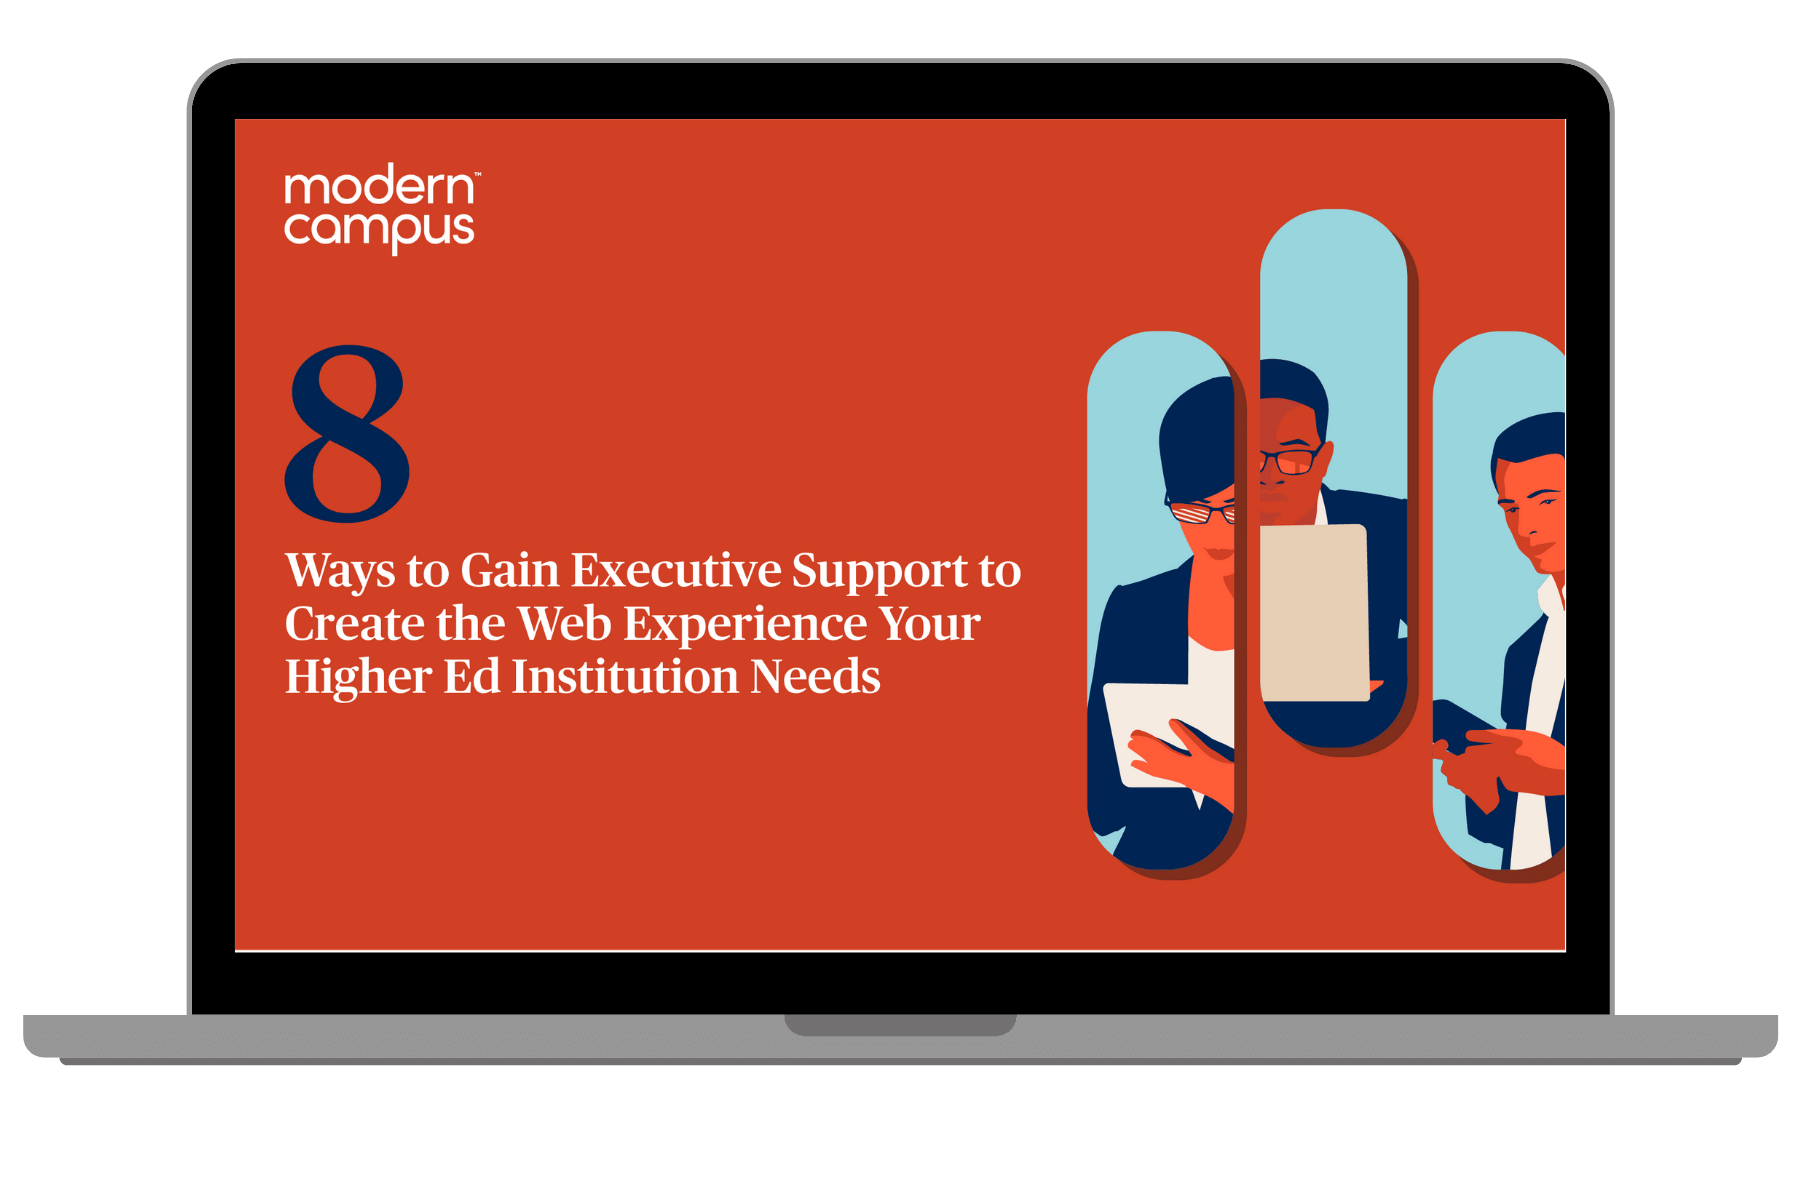 8 Ways to Gain Executive Support to Create the Web Experience Your Higher Ed Institution Needs